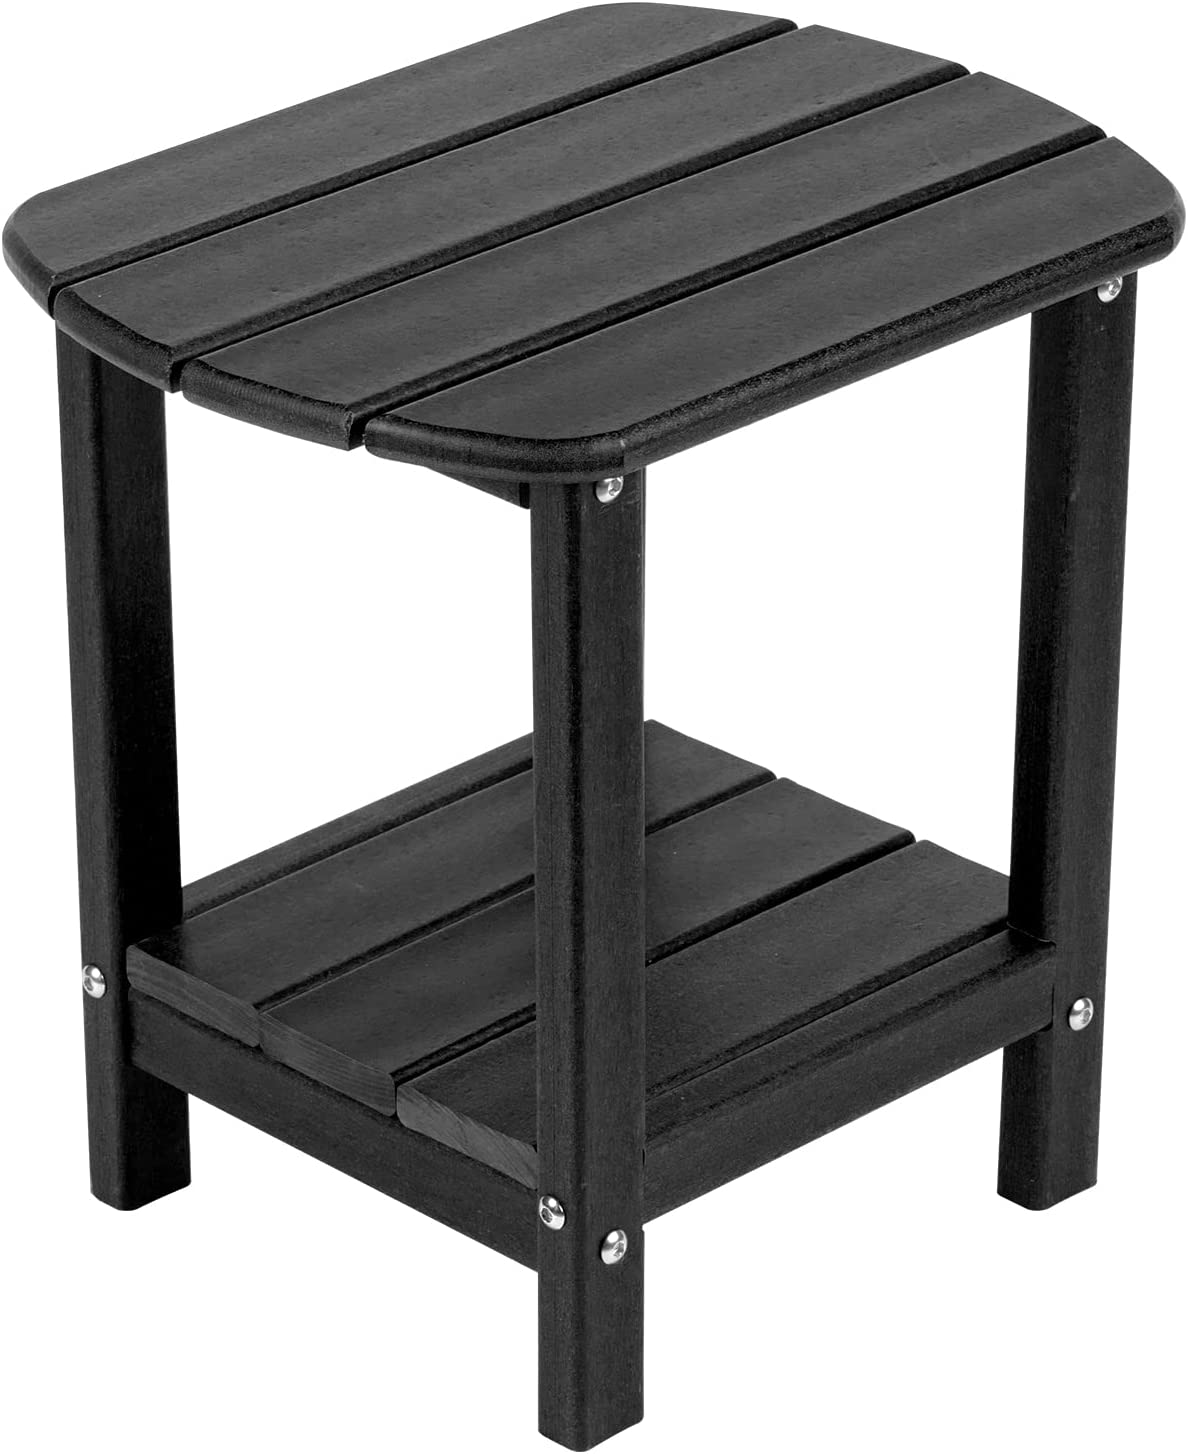 NALONE Adirondack Side Table 16.5" Outdoor Side Table HDPE Plastic Double Adirondack End Table Small Table for Patio (Black) - image 1 of 6